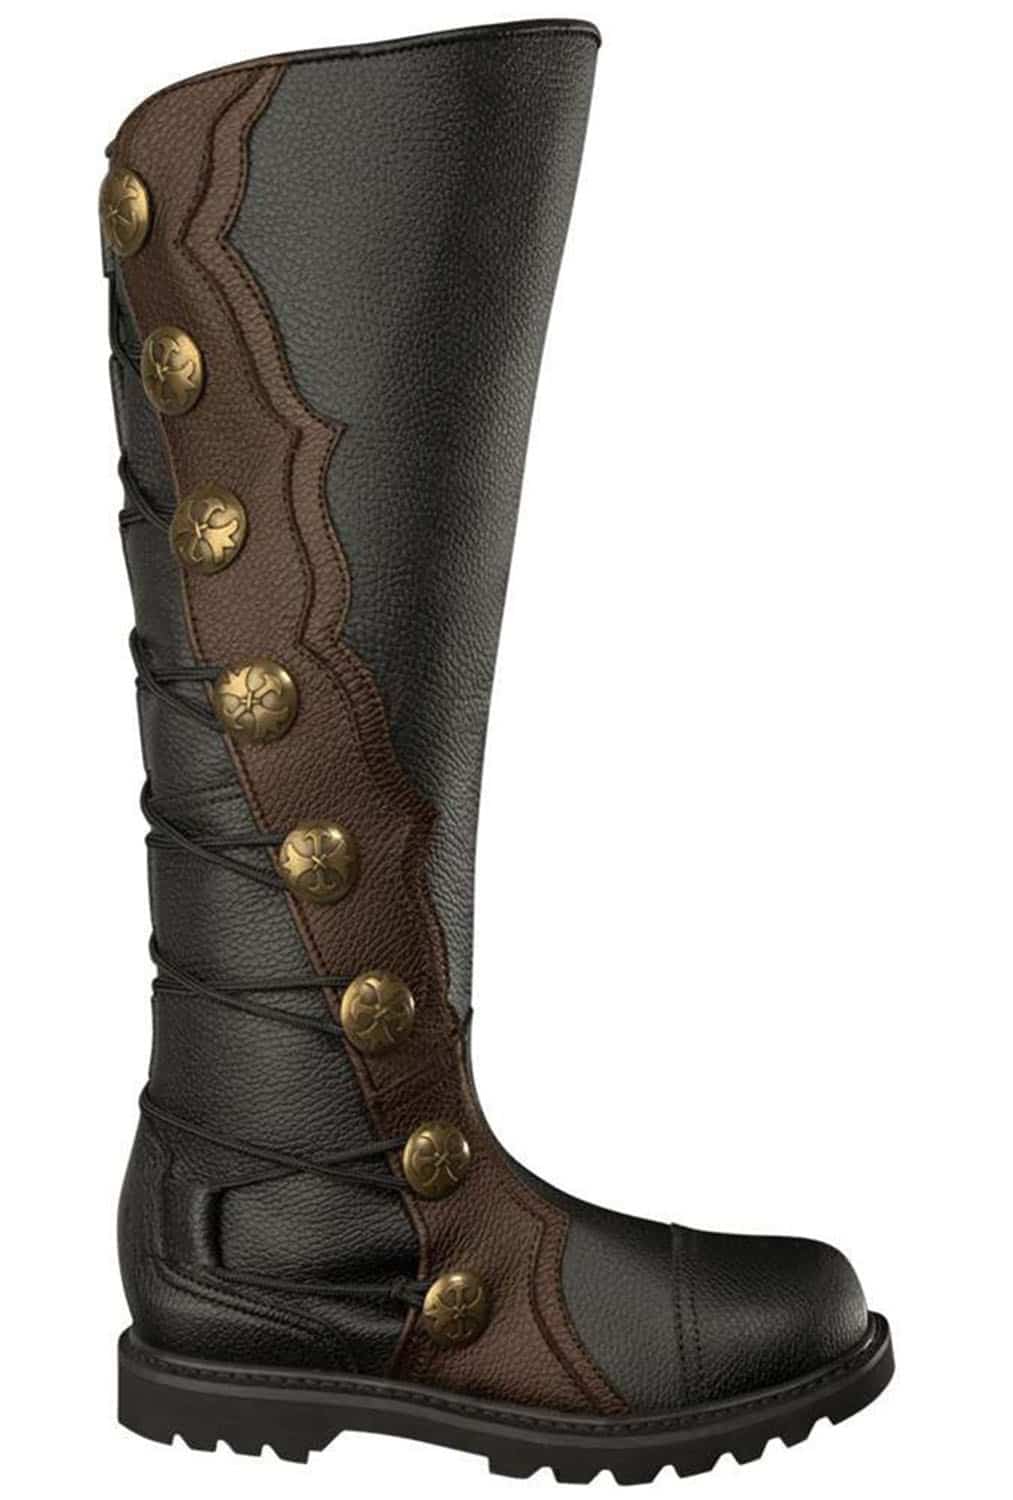 leather knee high walking boots